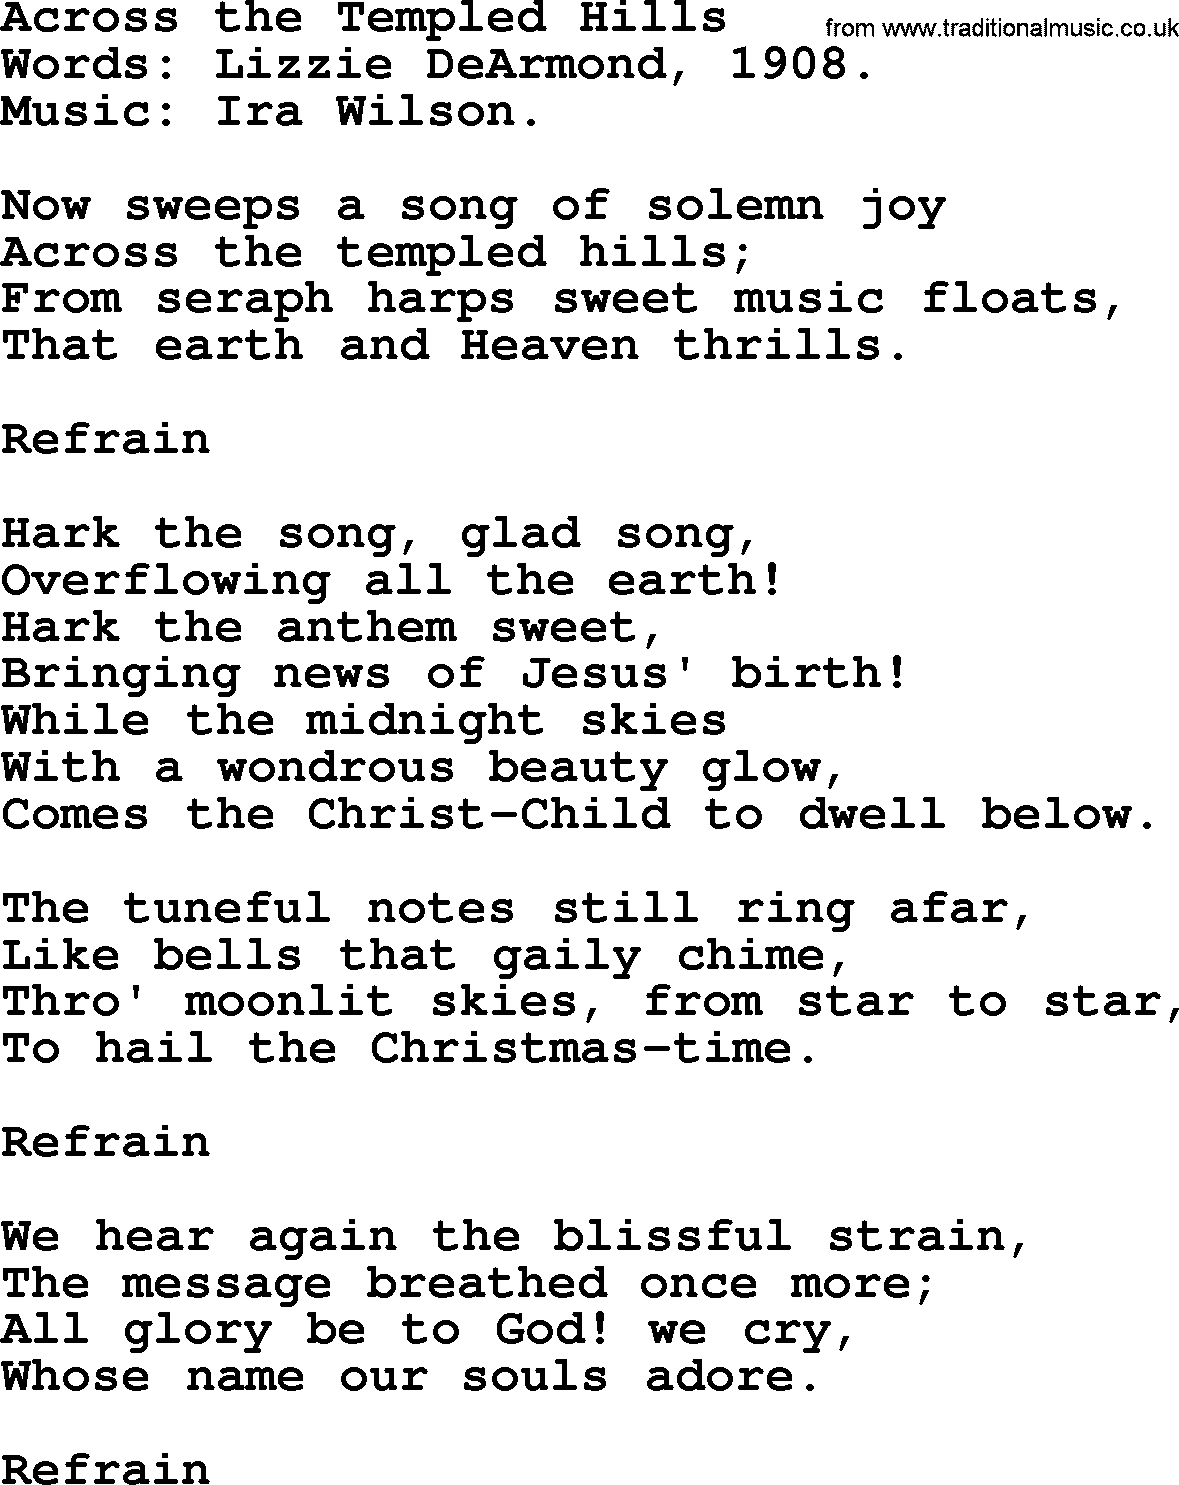 Christmas Hymns, Carols and Songs, title: Across The Templed Hills, lyrics with PDF